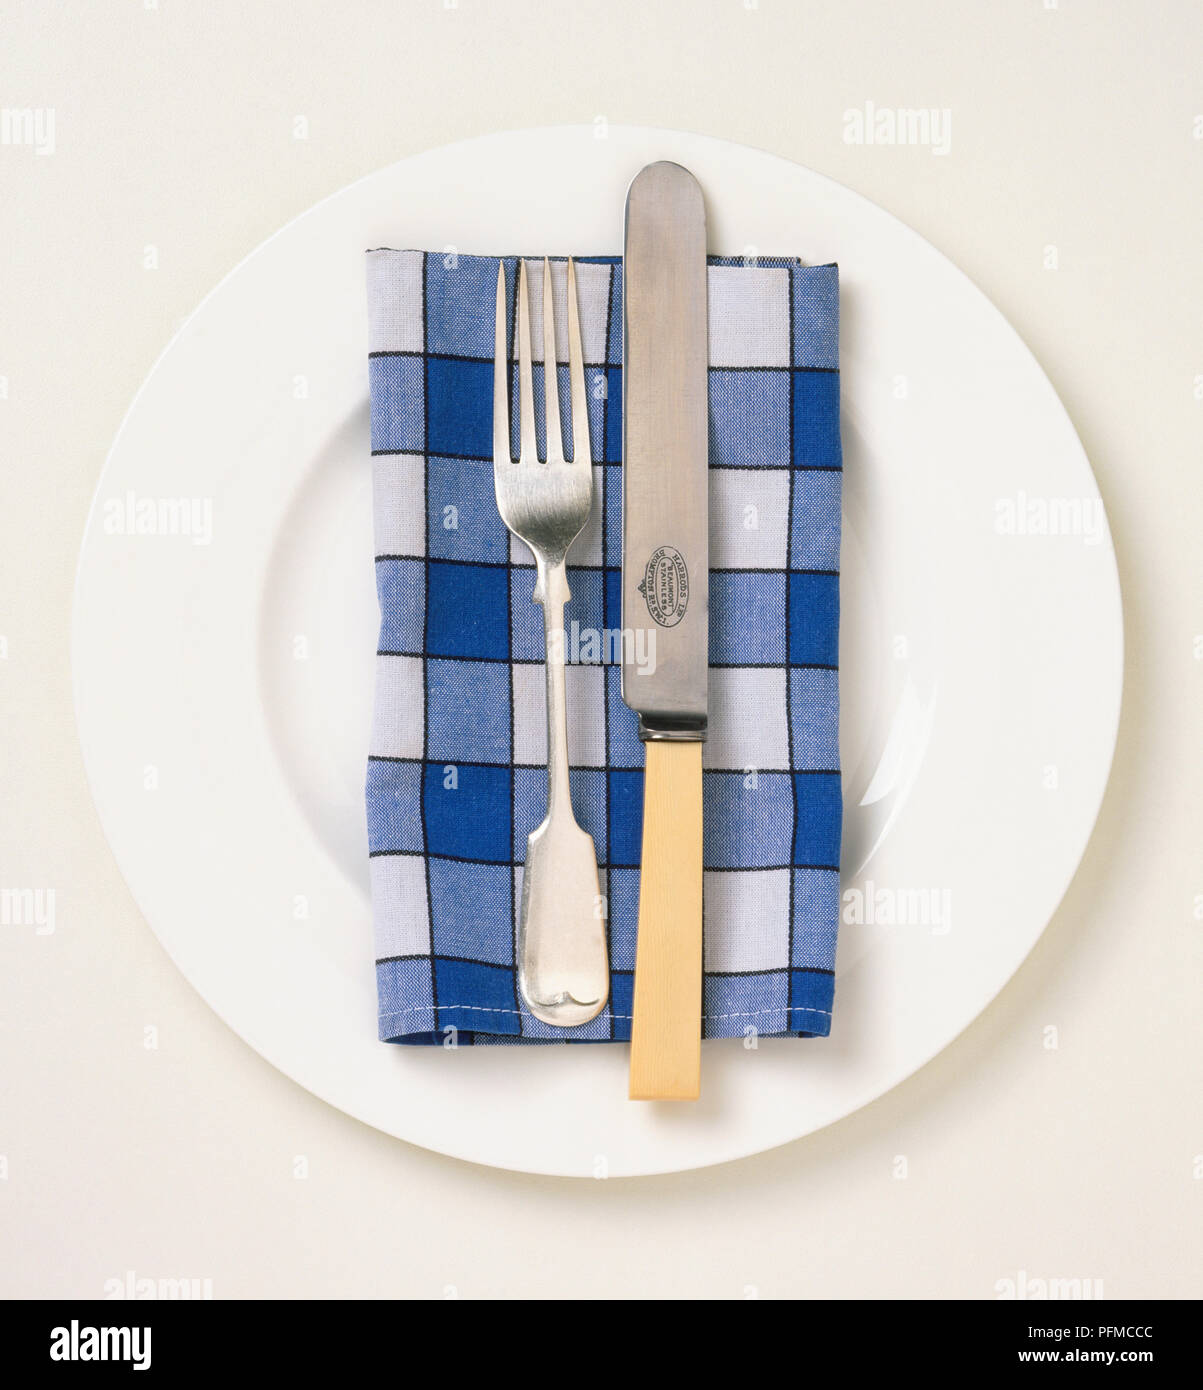 Silver fork and bone-handled knife on a napkin placed on a white plate. Stock Photo